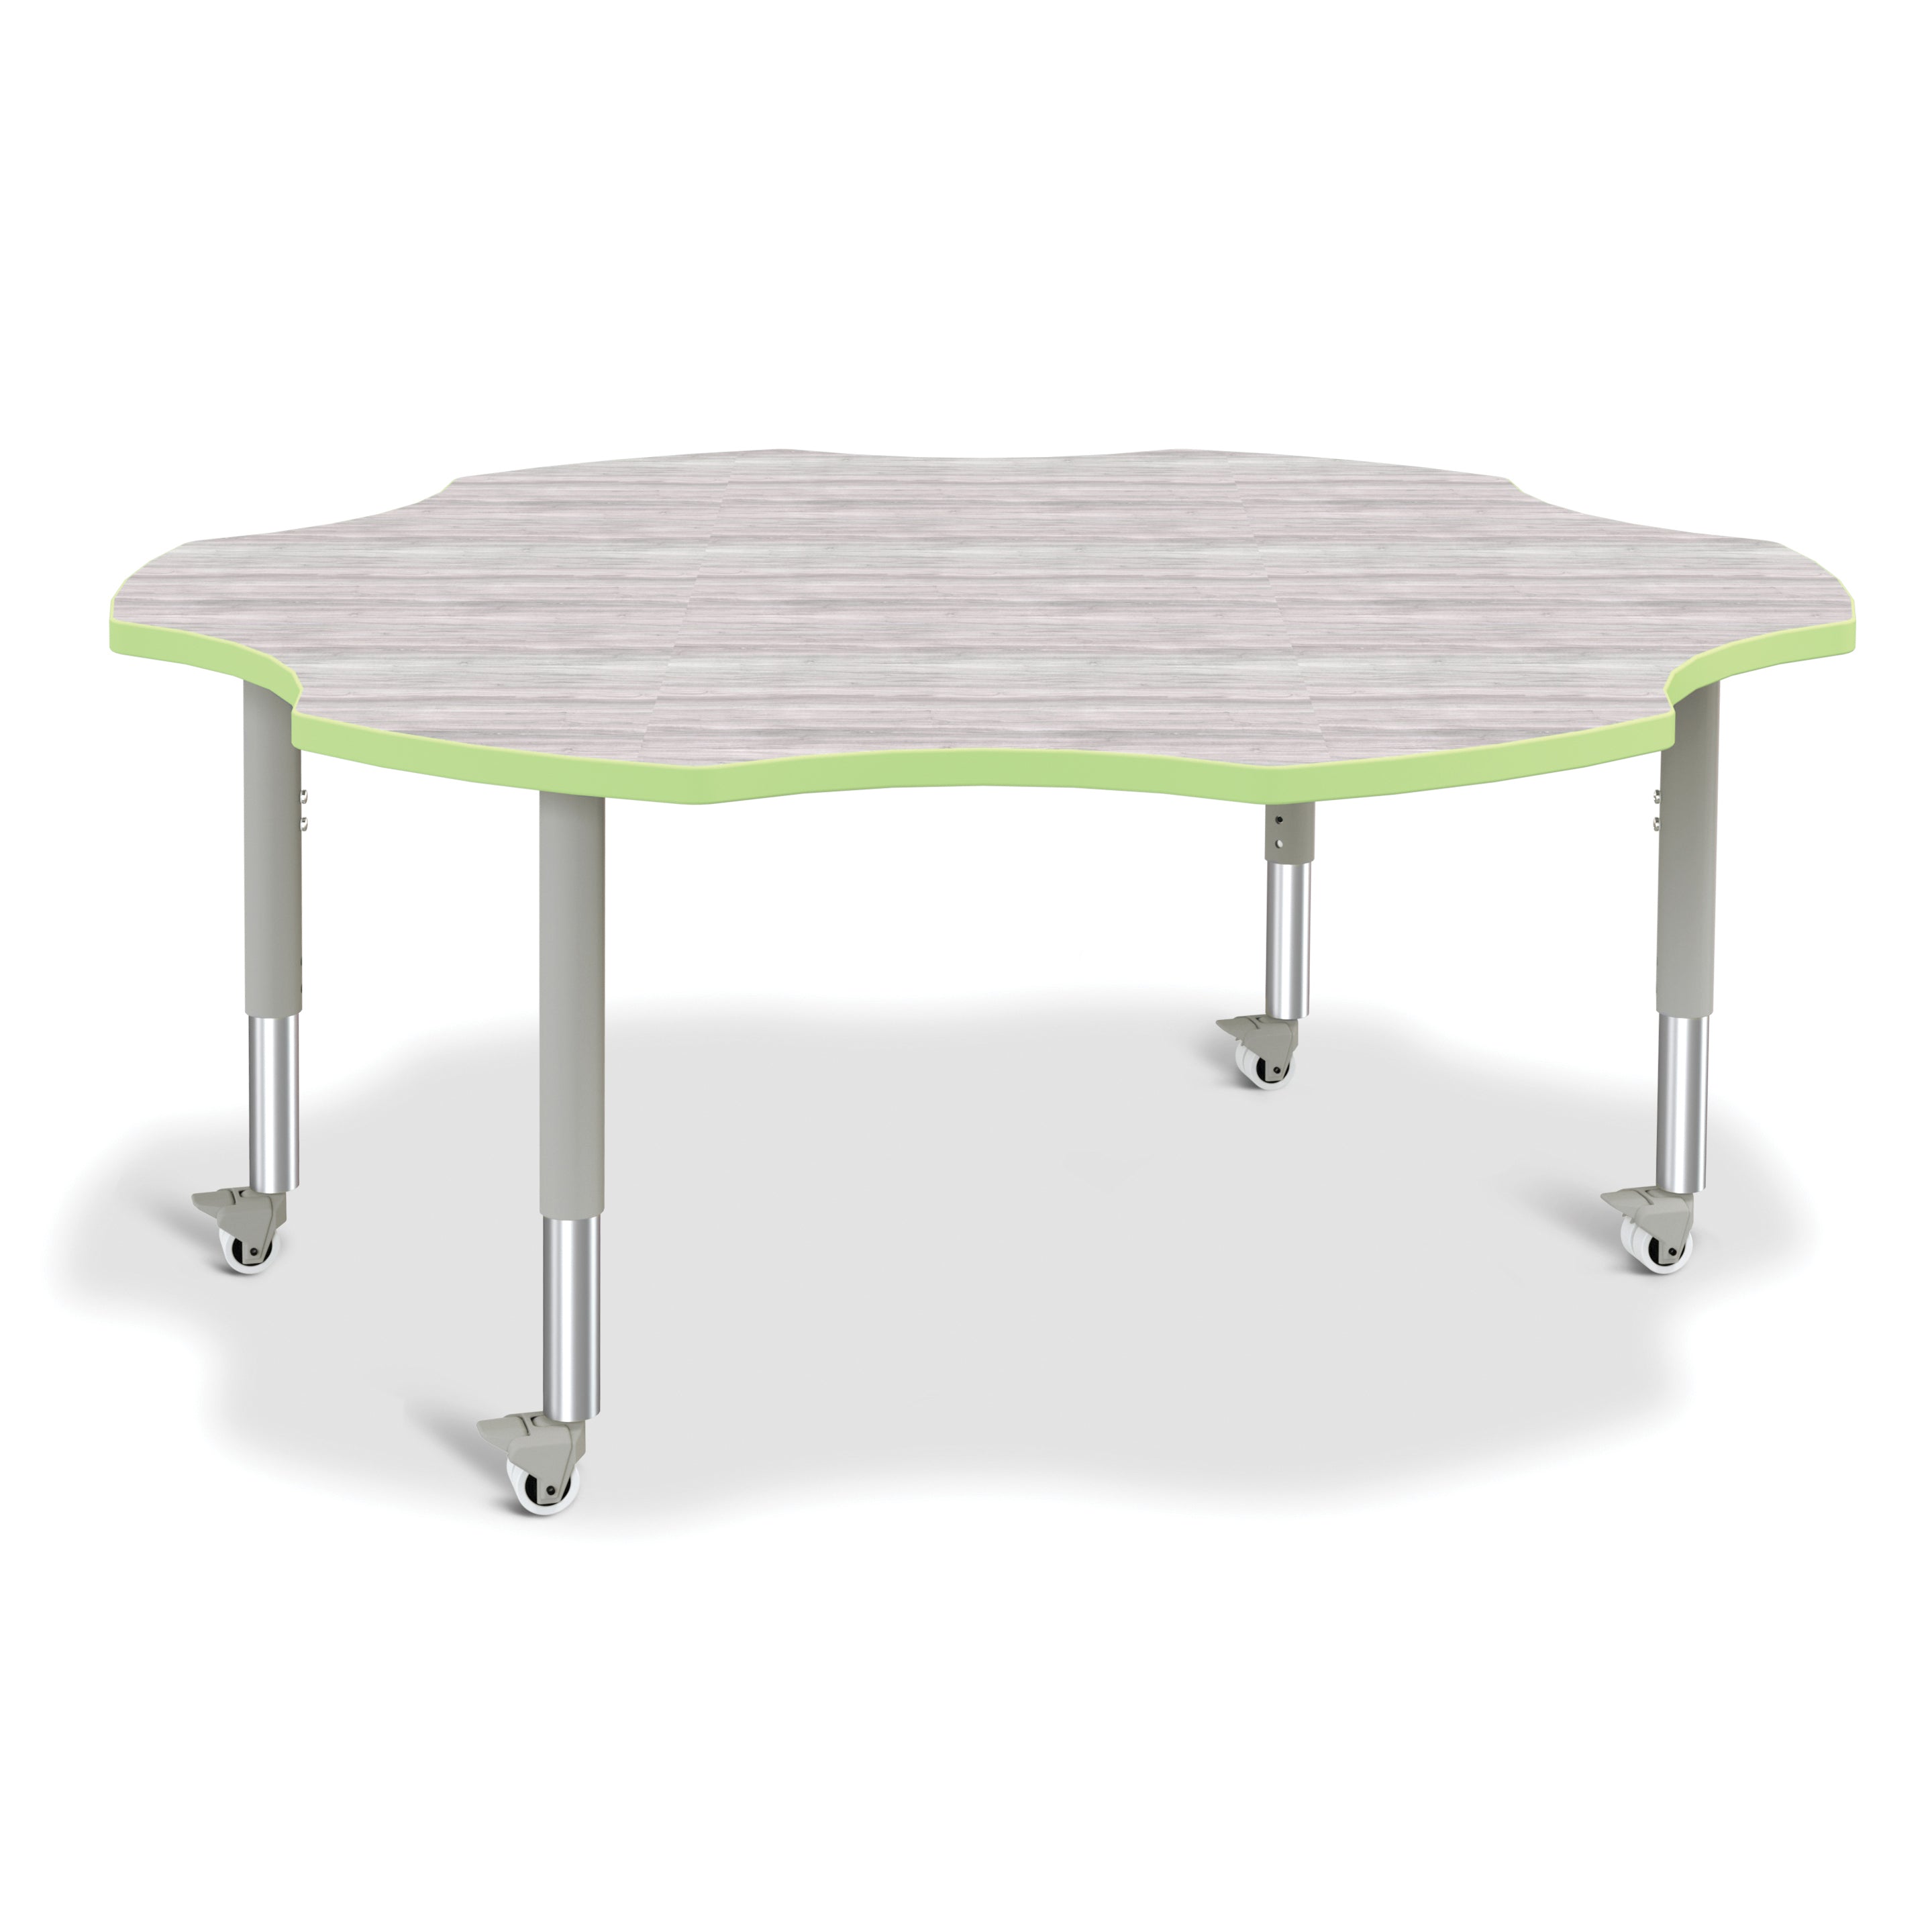 6458JCM451, Berries Six Leaf Activity Table - Mobile - Driftwood Gray/Key Lime/Gray